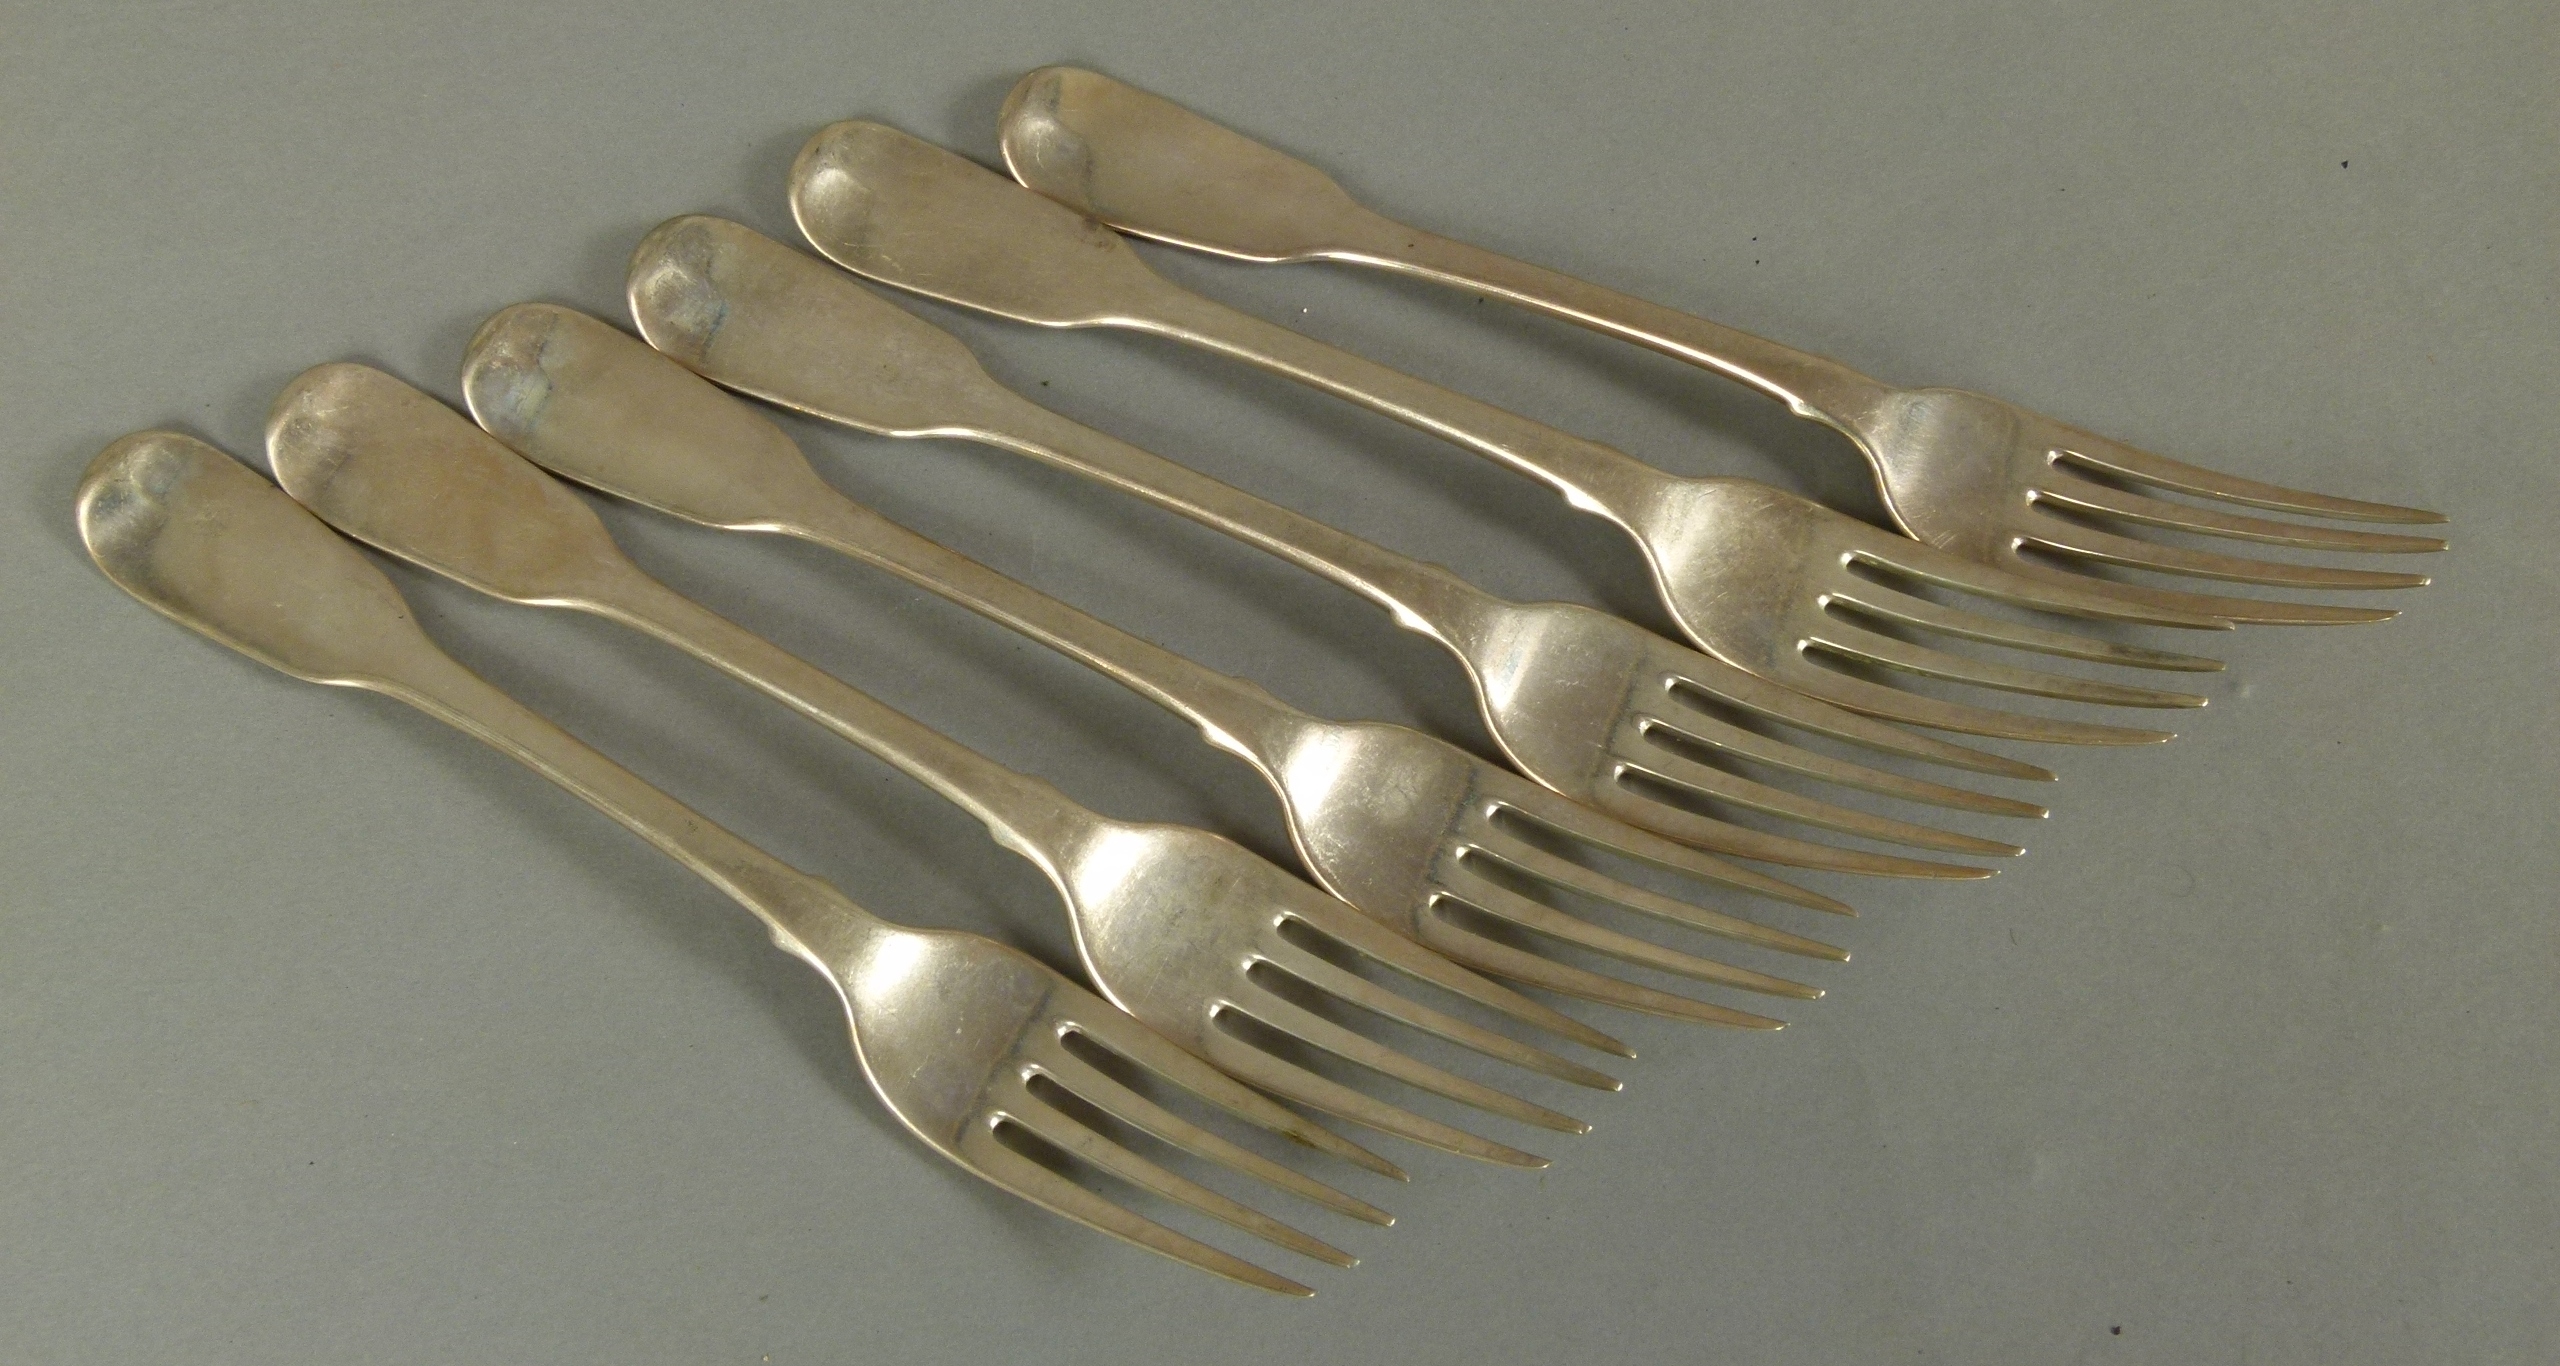 A SET OF SIX GEORGE IV FIDDLE PATTERN TABLE FORKS engraved with a crest, by Francis Higgins, - Image 2 of 3